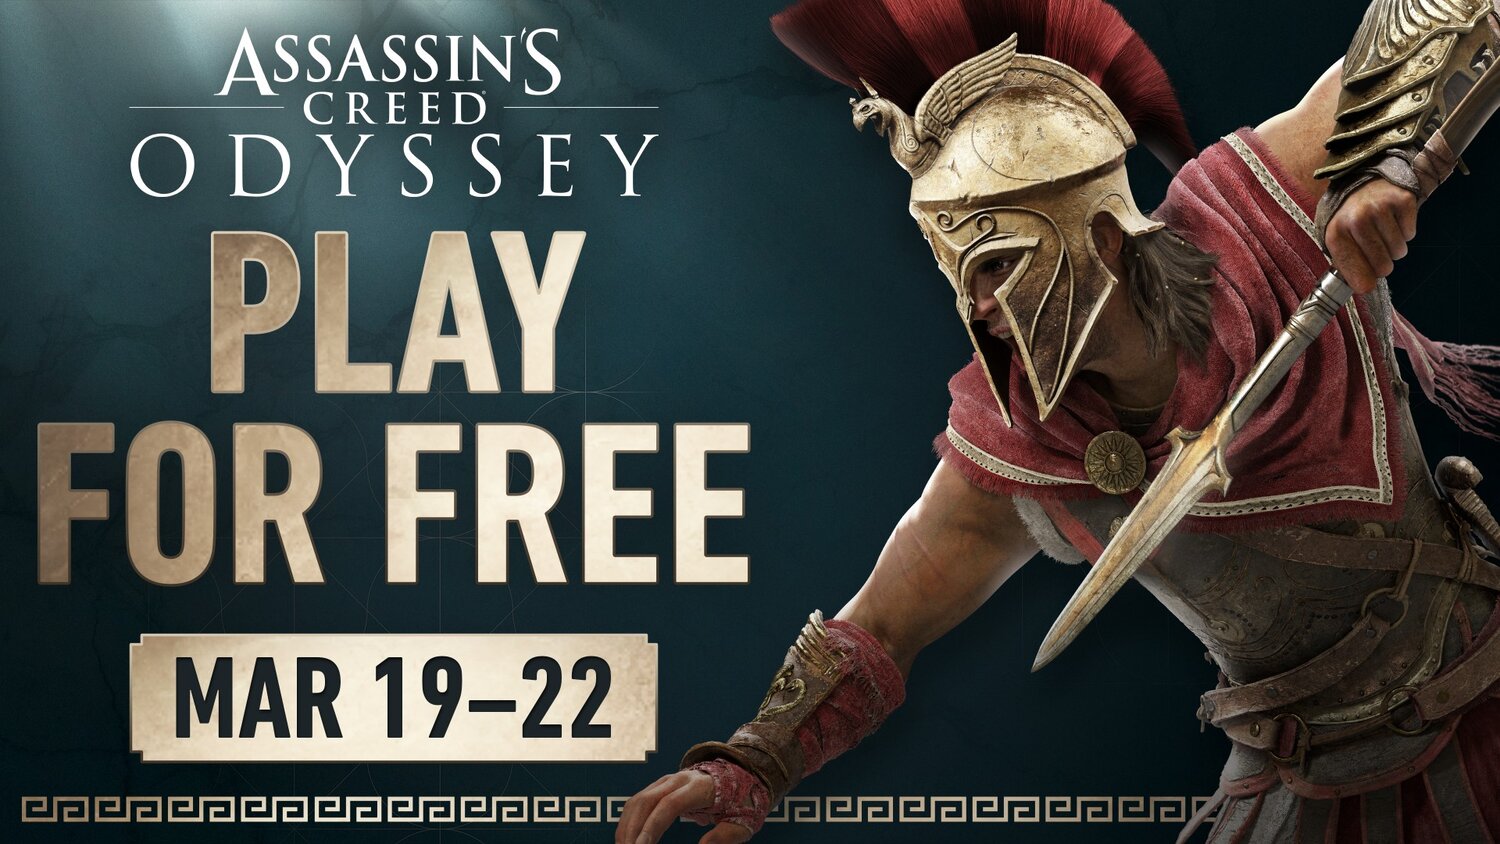 Assassin's Creed Odyssey: The Fate of Atlantis Episode 2 Torments Hades in  Early June